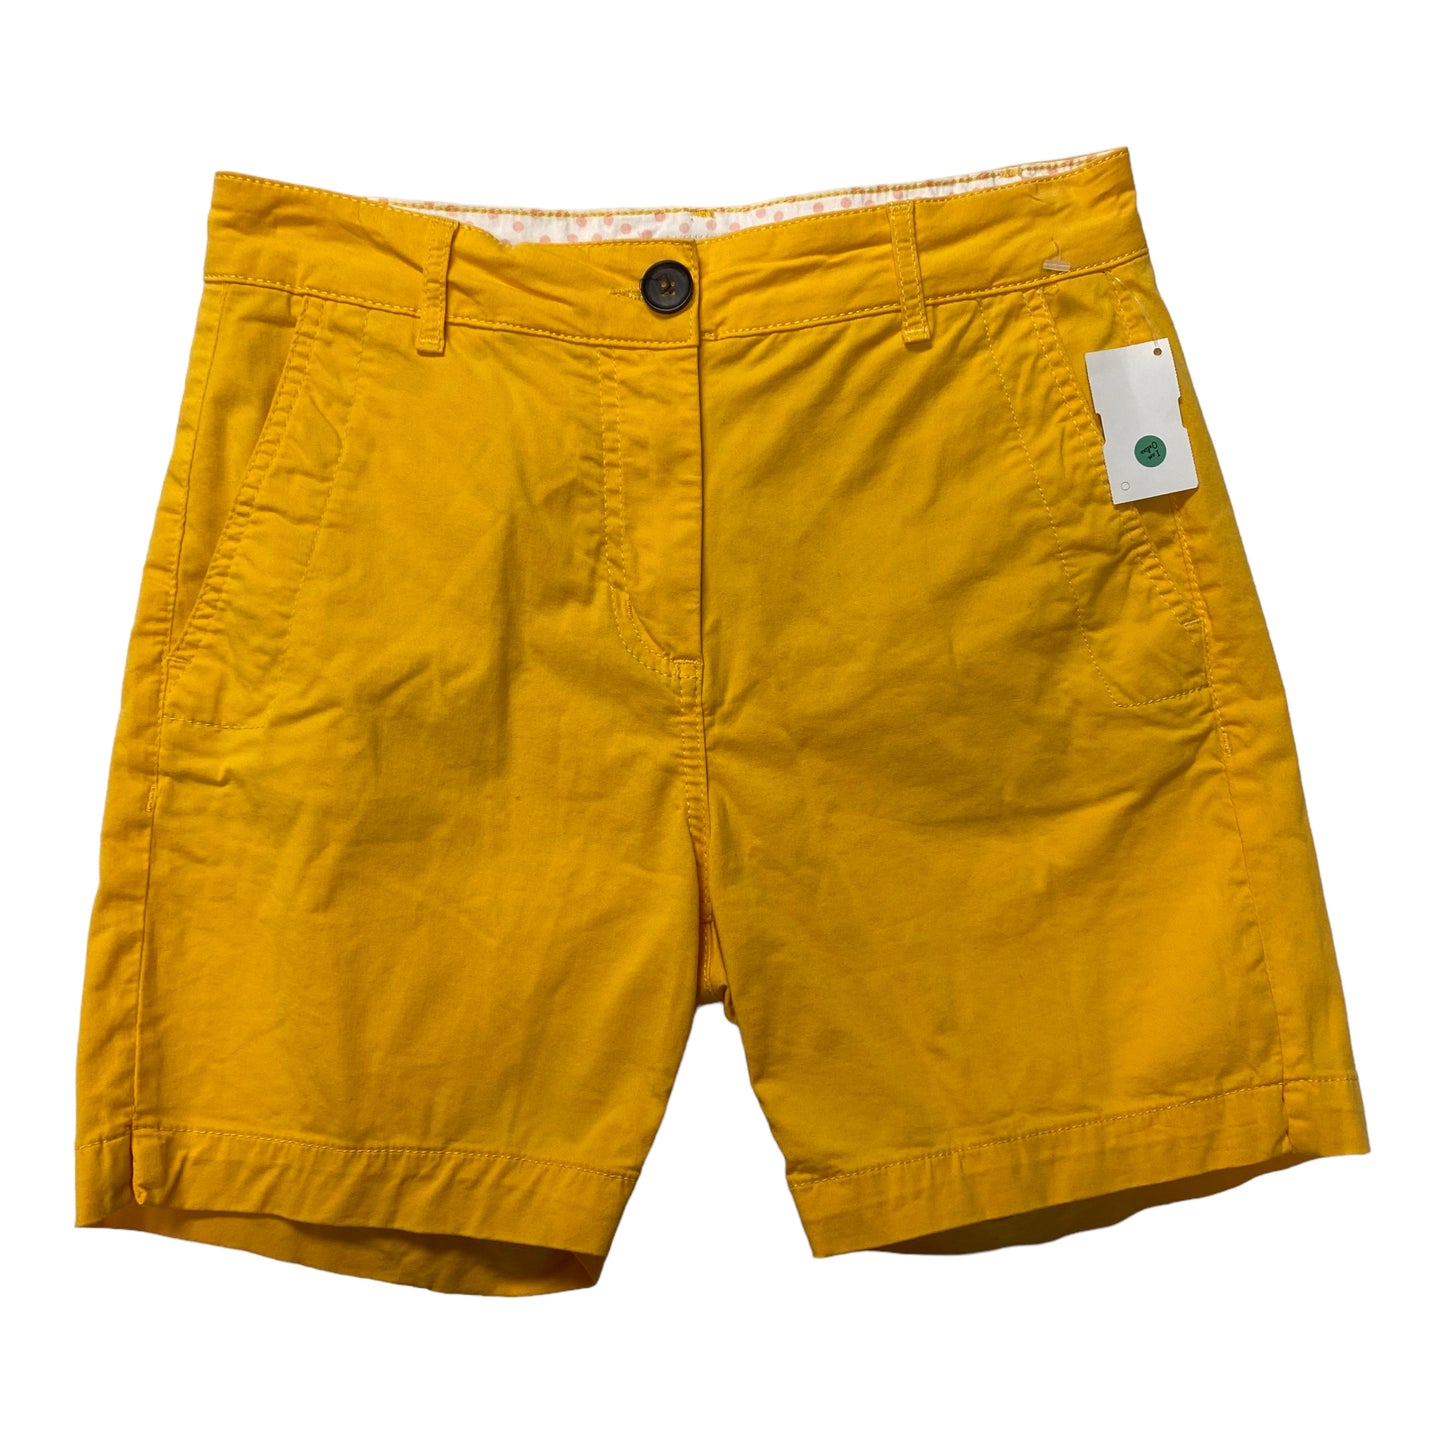 Yellow Shorts Boden, Size 2